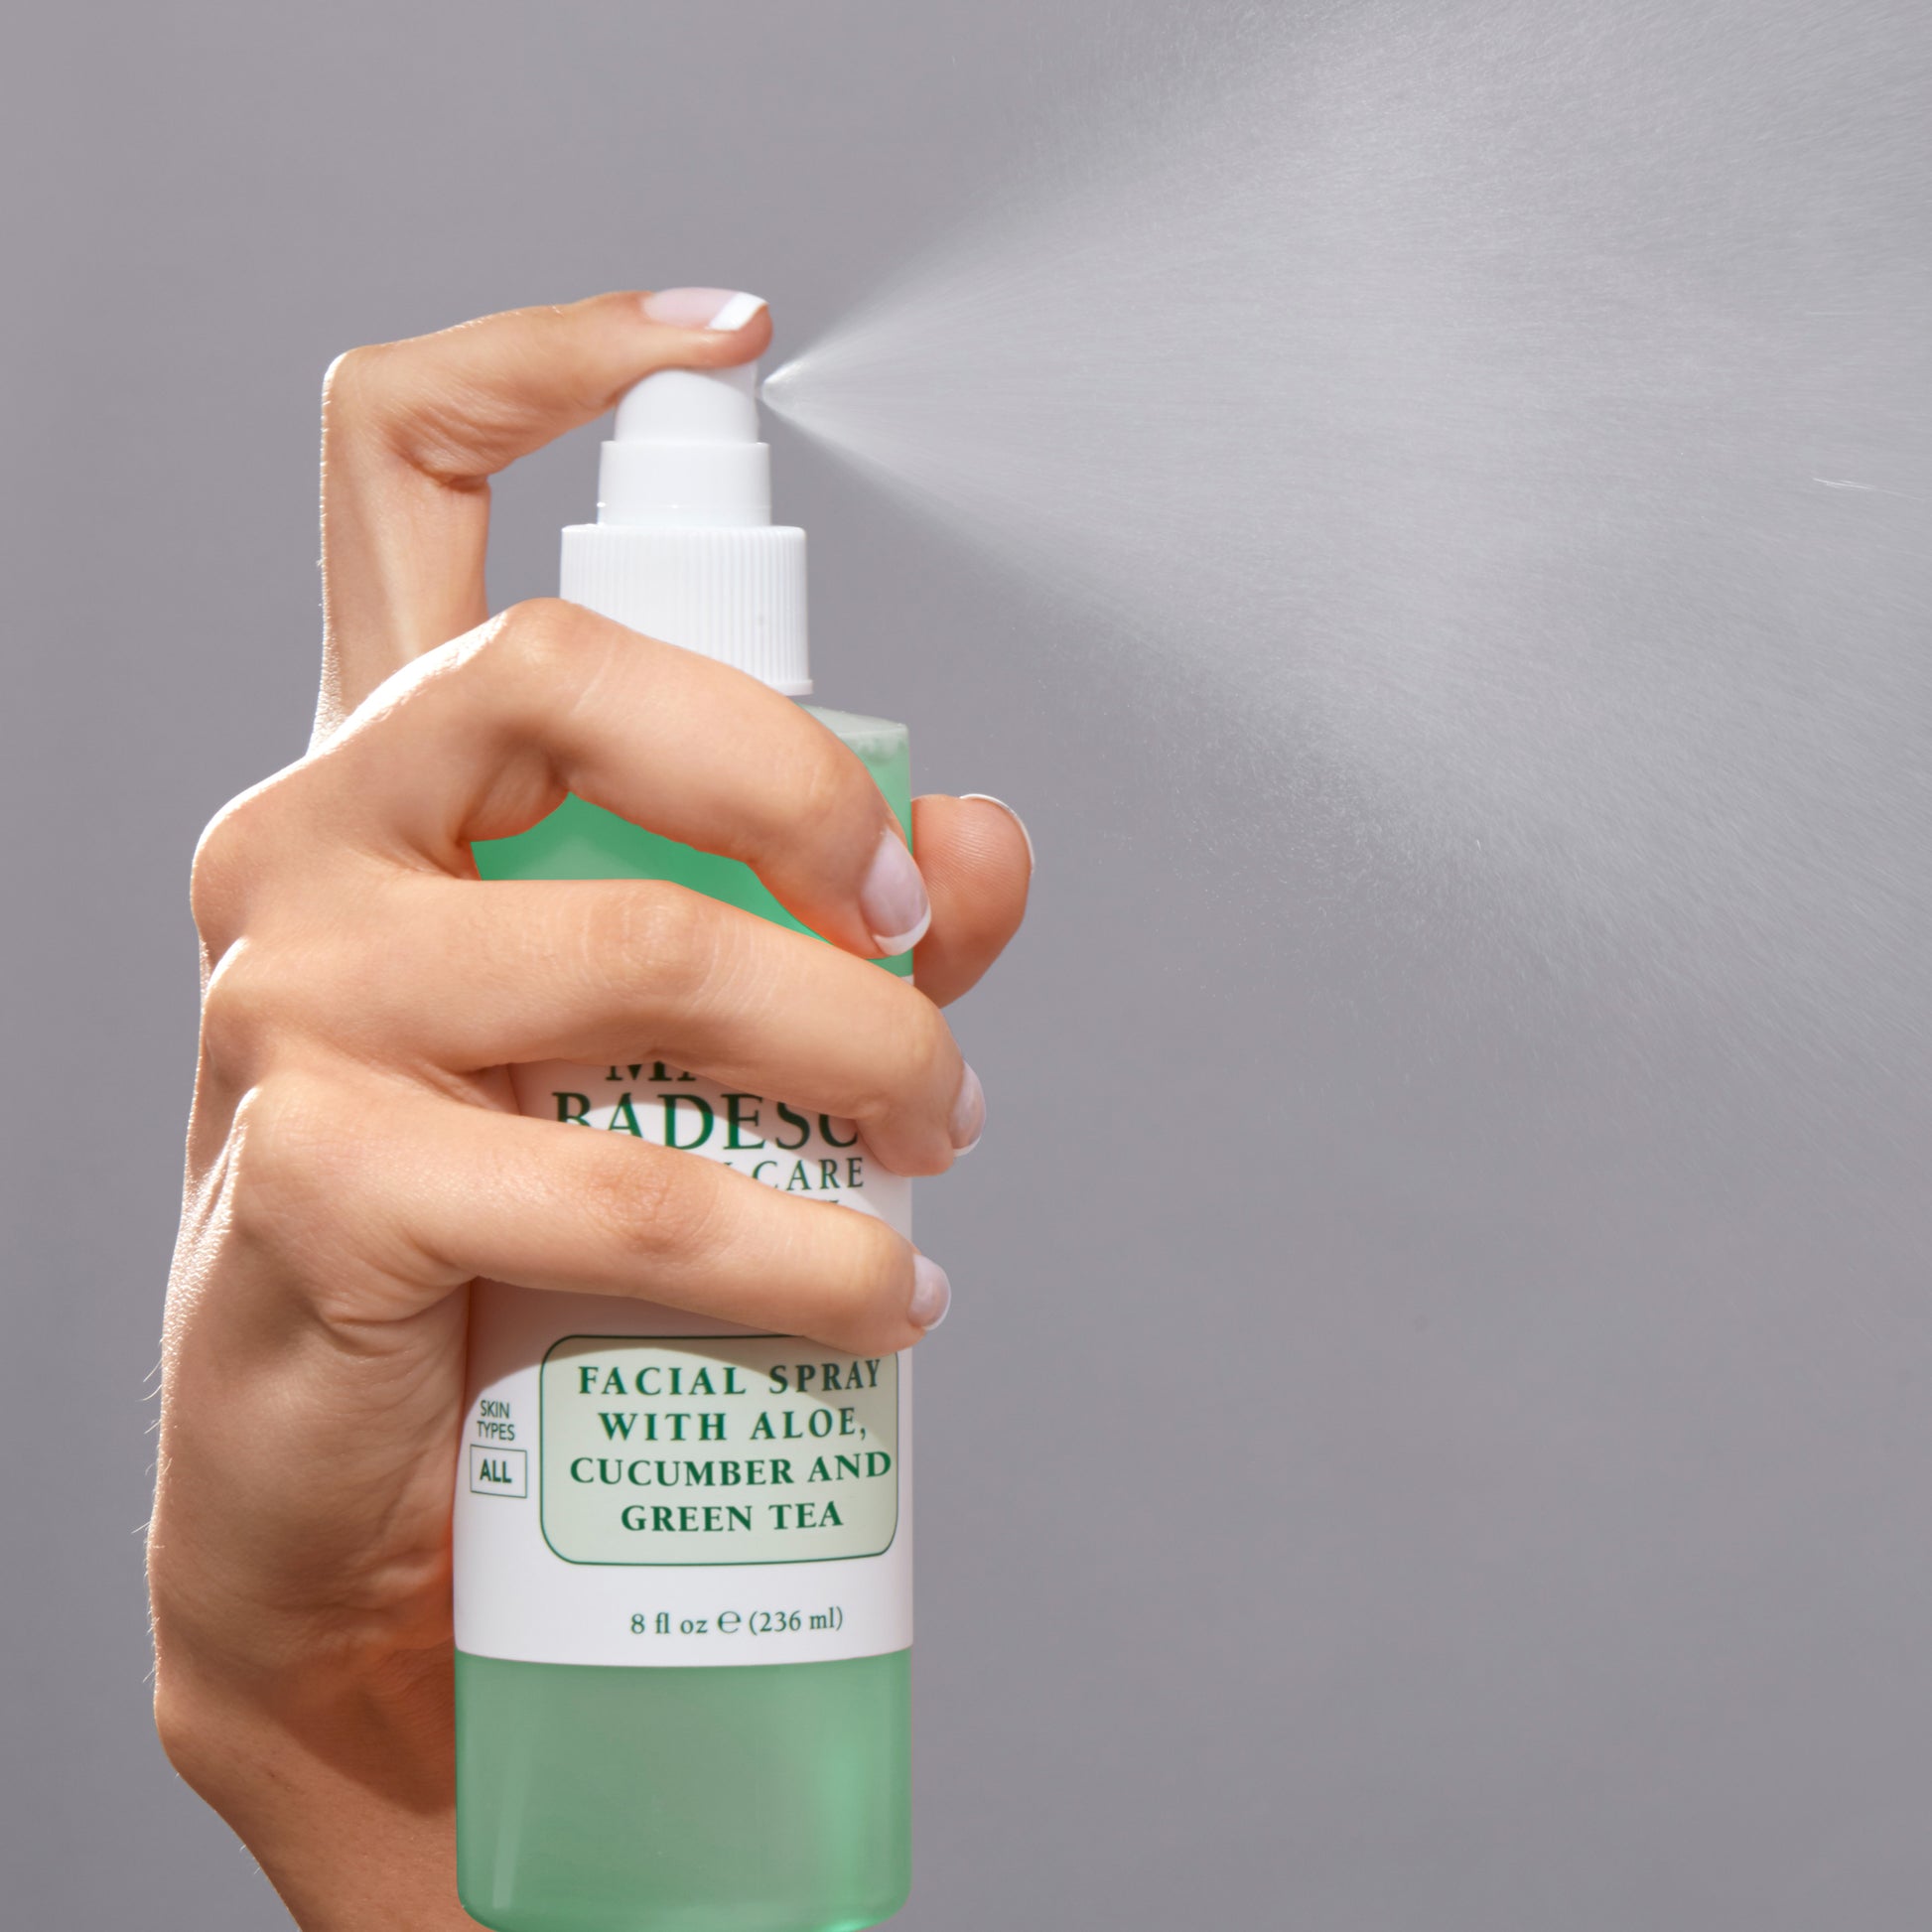 What Are the Different Types of Floral Finishing Sprays & How Do